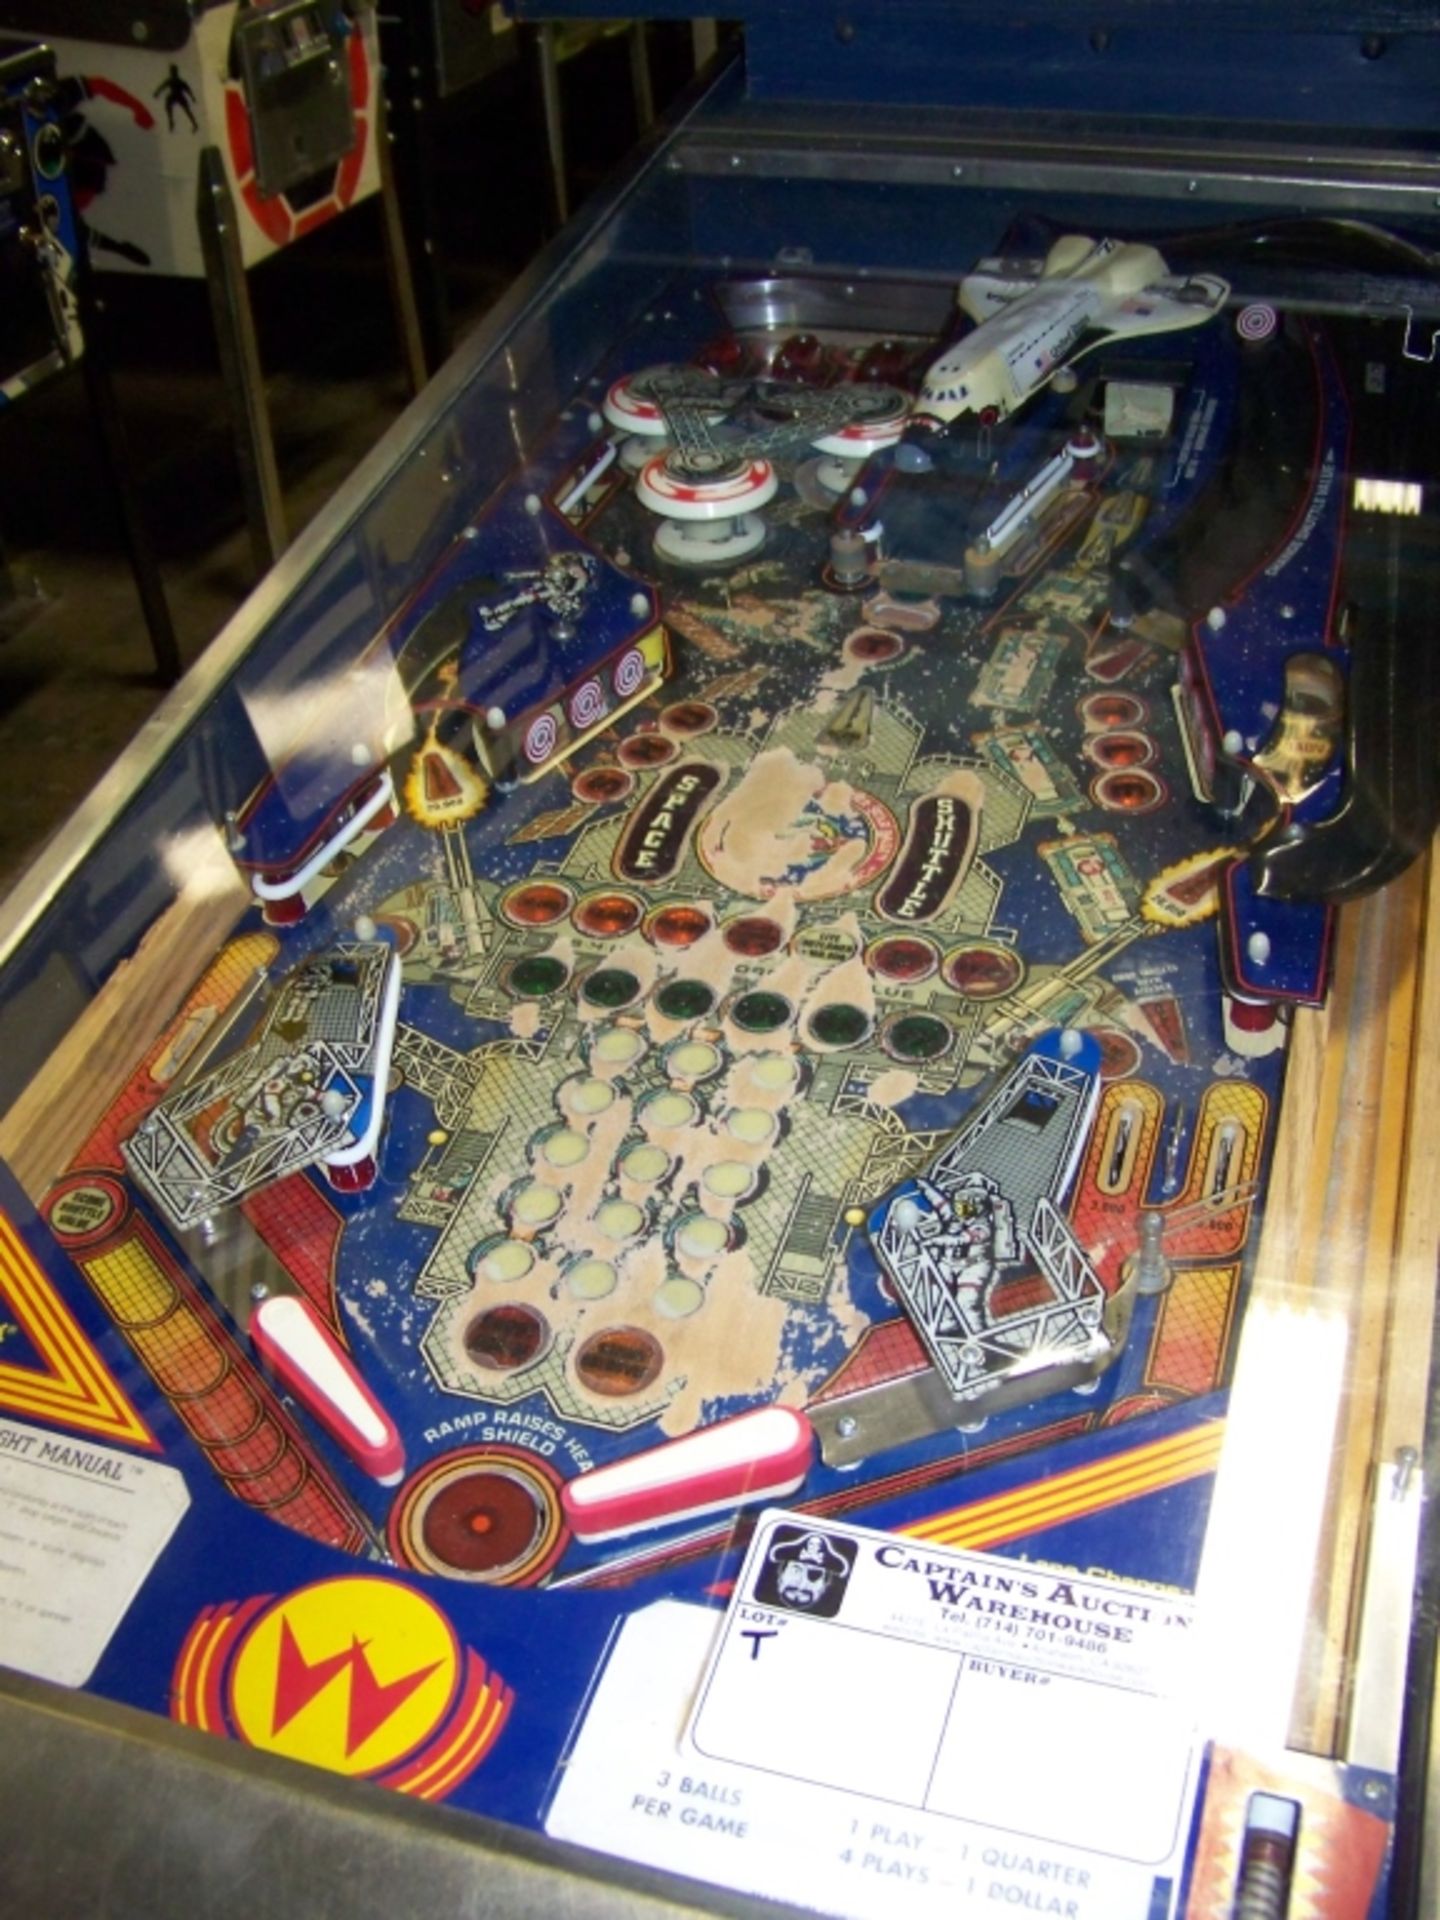 SPACE SHUTTLE PINBALL MACHINE PROJECT WILLIAMS Item is in used condition. Evidence of wear and - Image 4 of 6